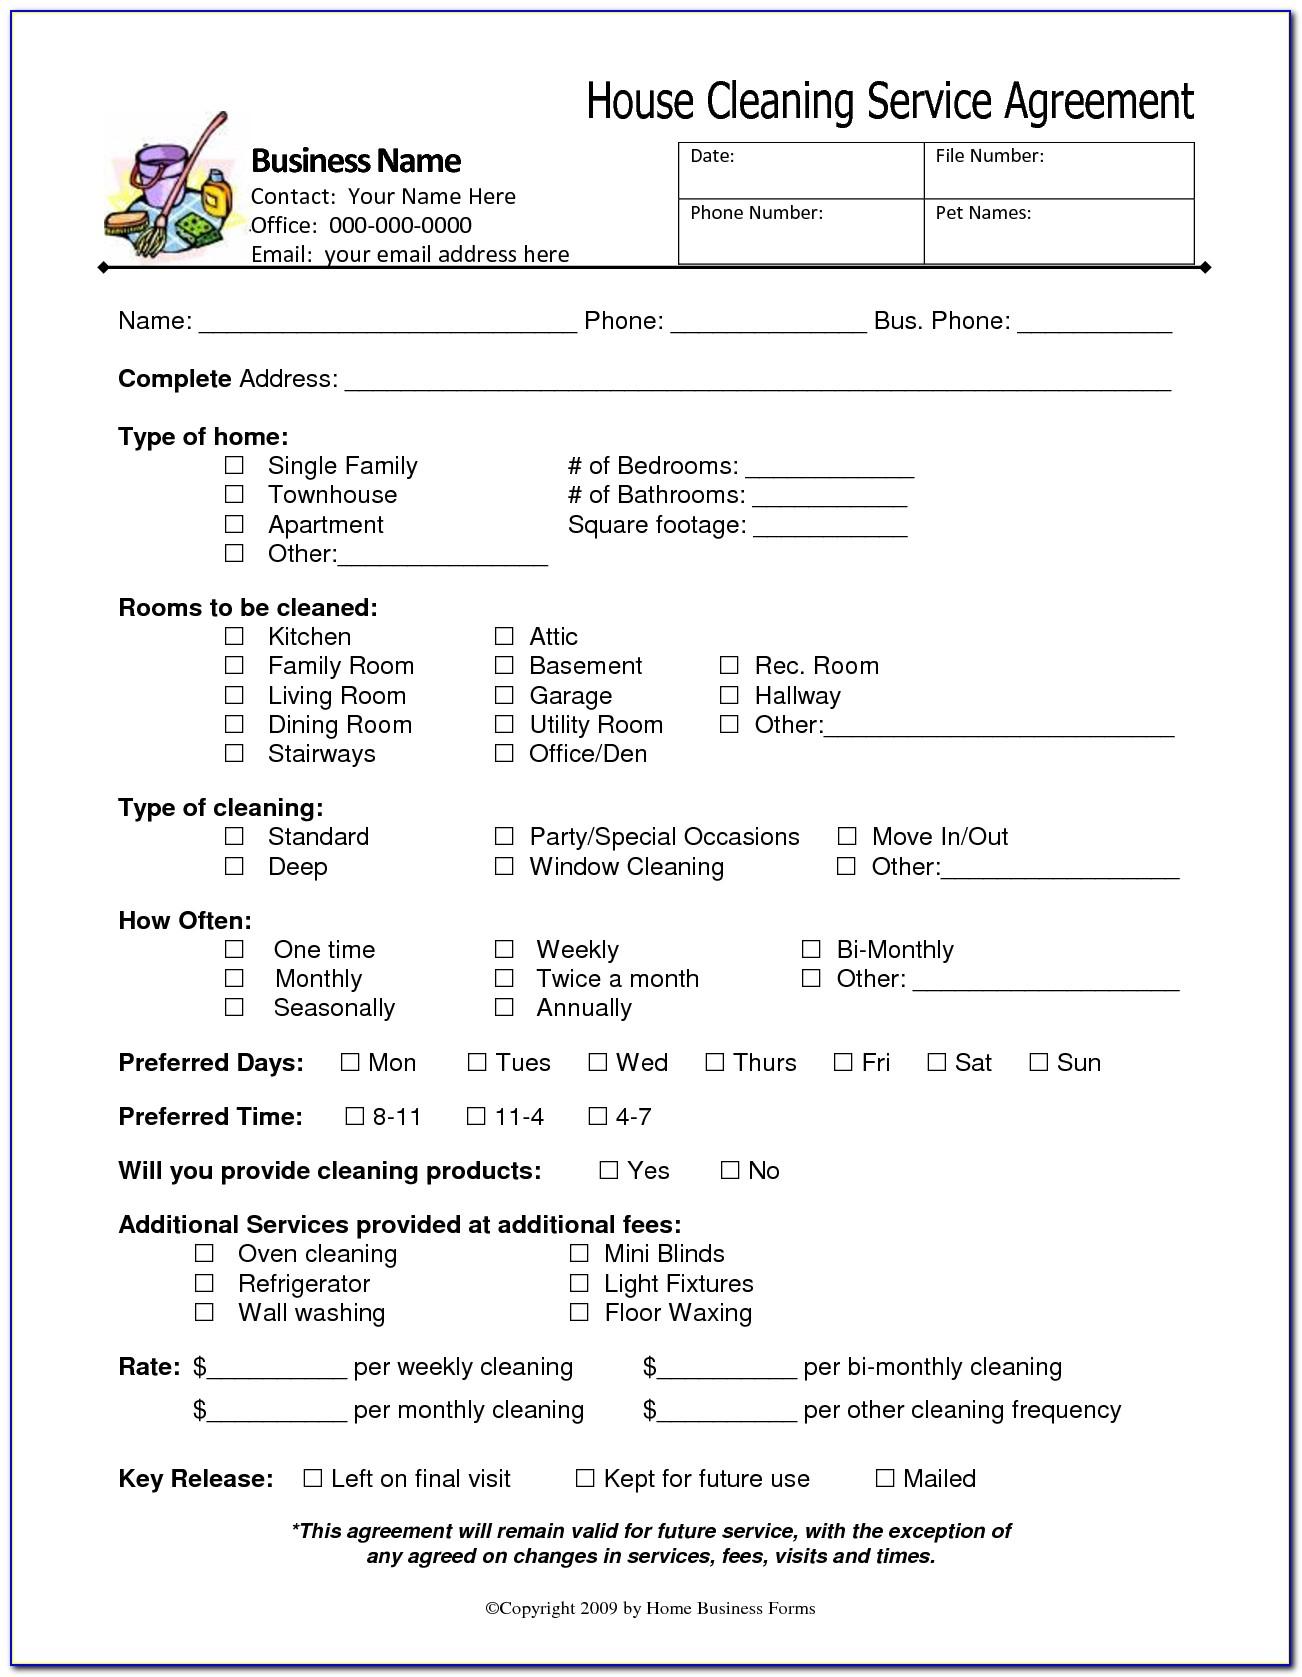 Residential Cleaning Service Agreement Template